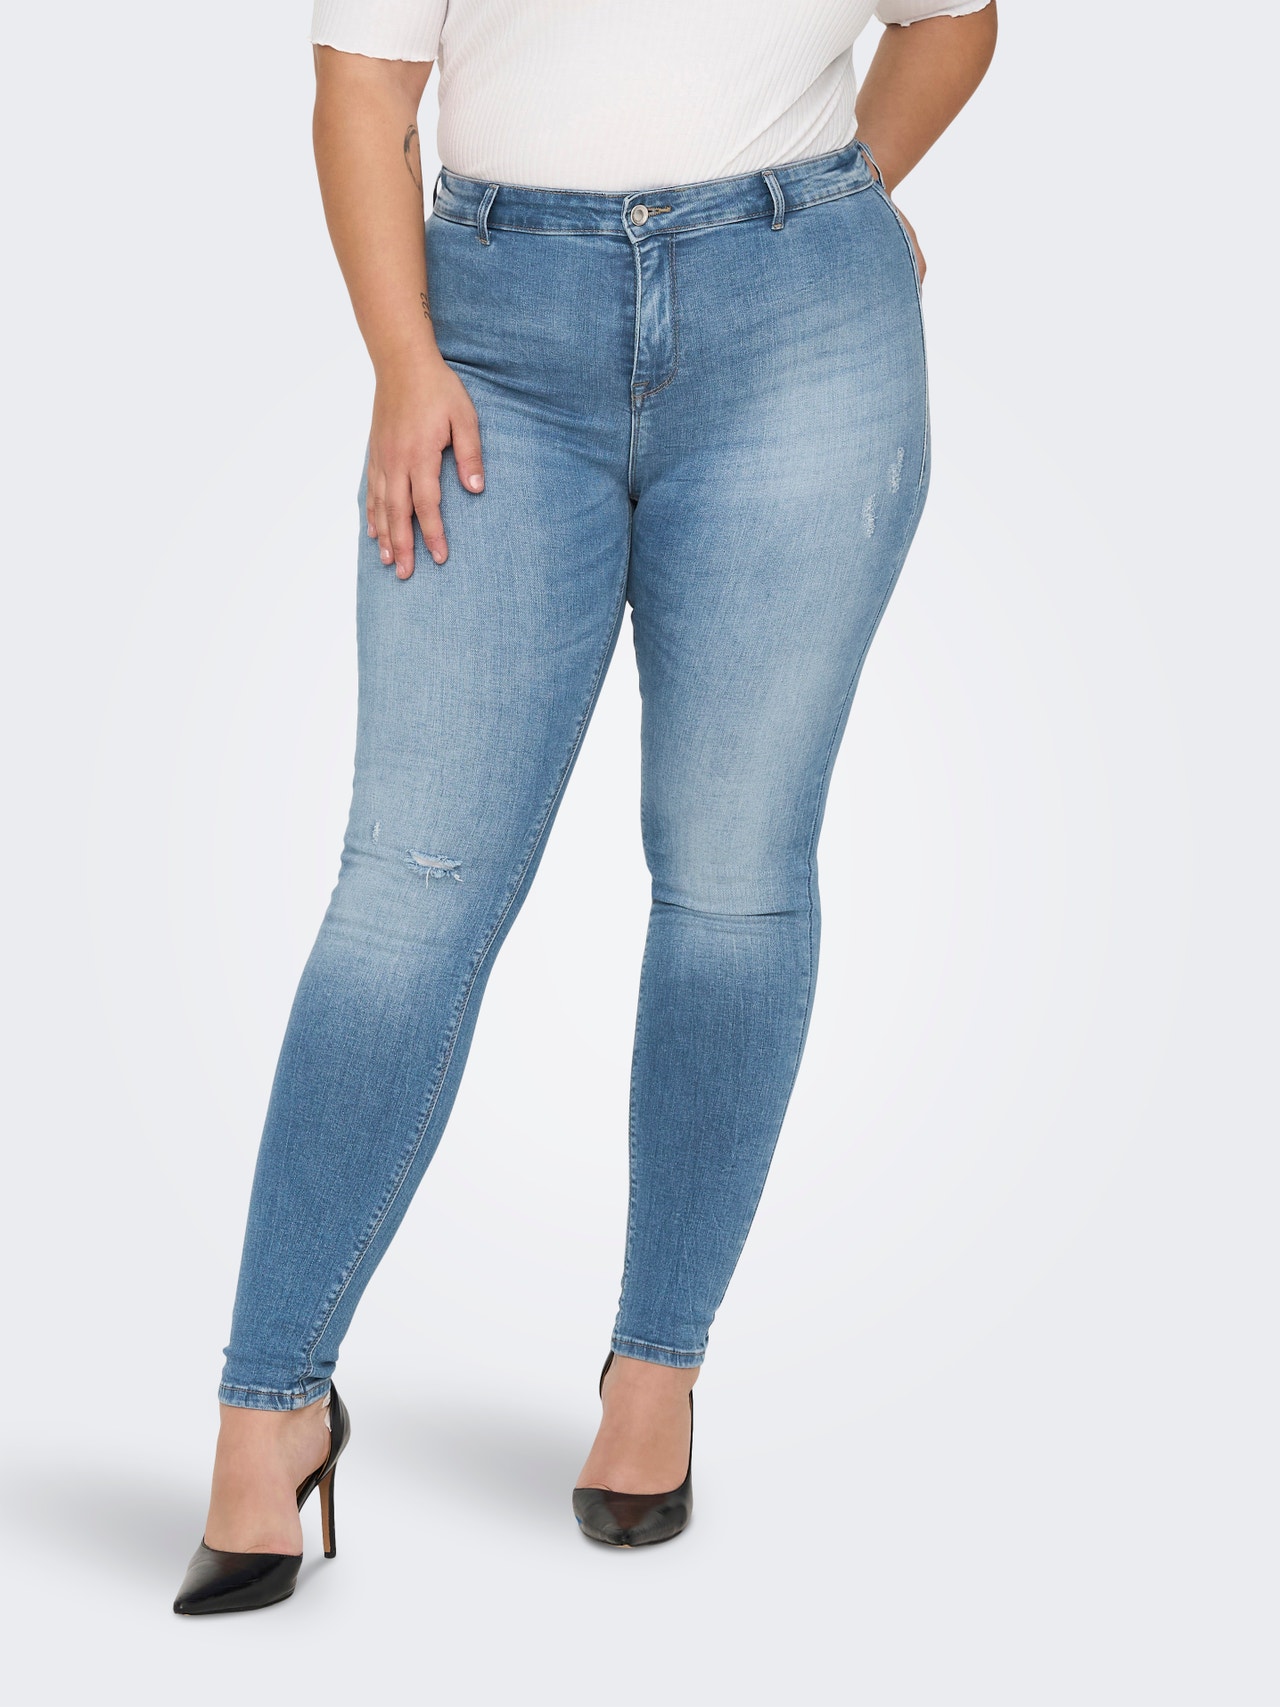 Plus Size Button Detailed Jeggings High Waist Denim Skinny Jeans